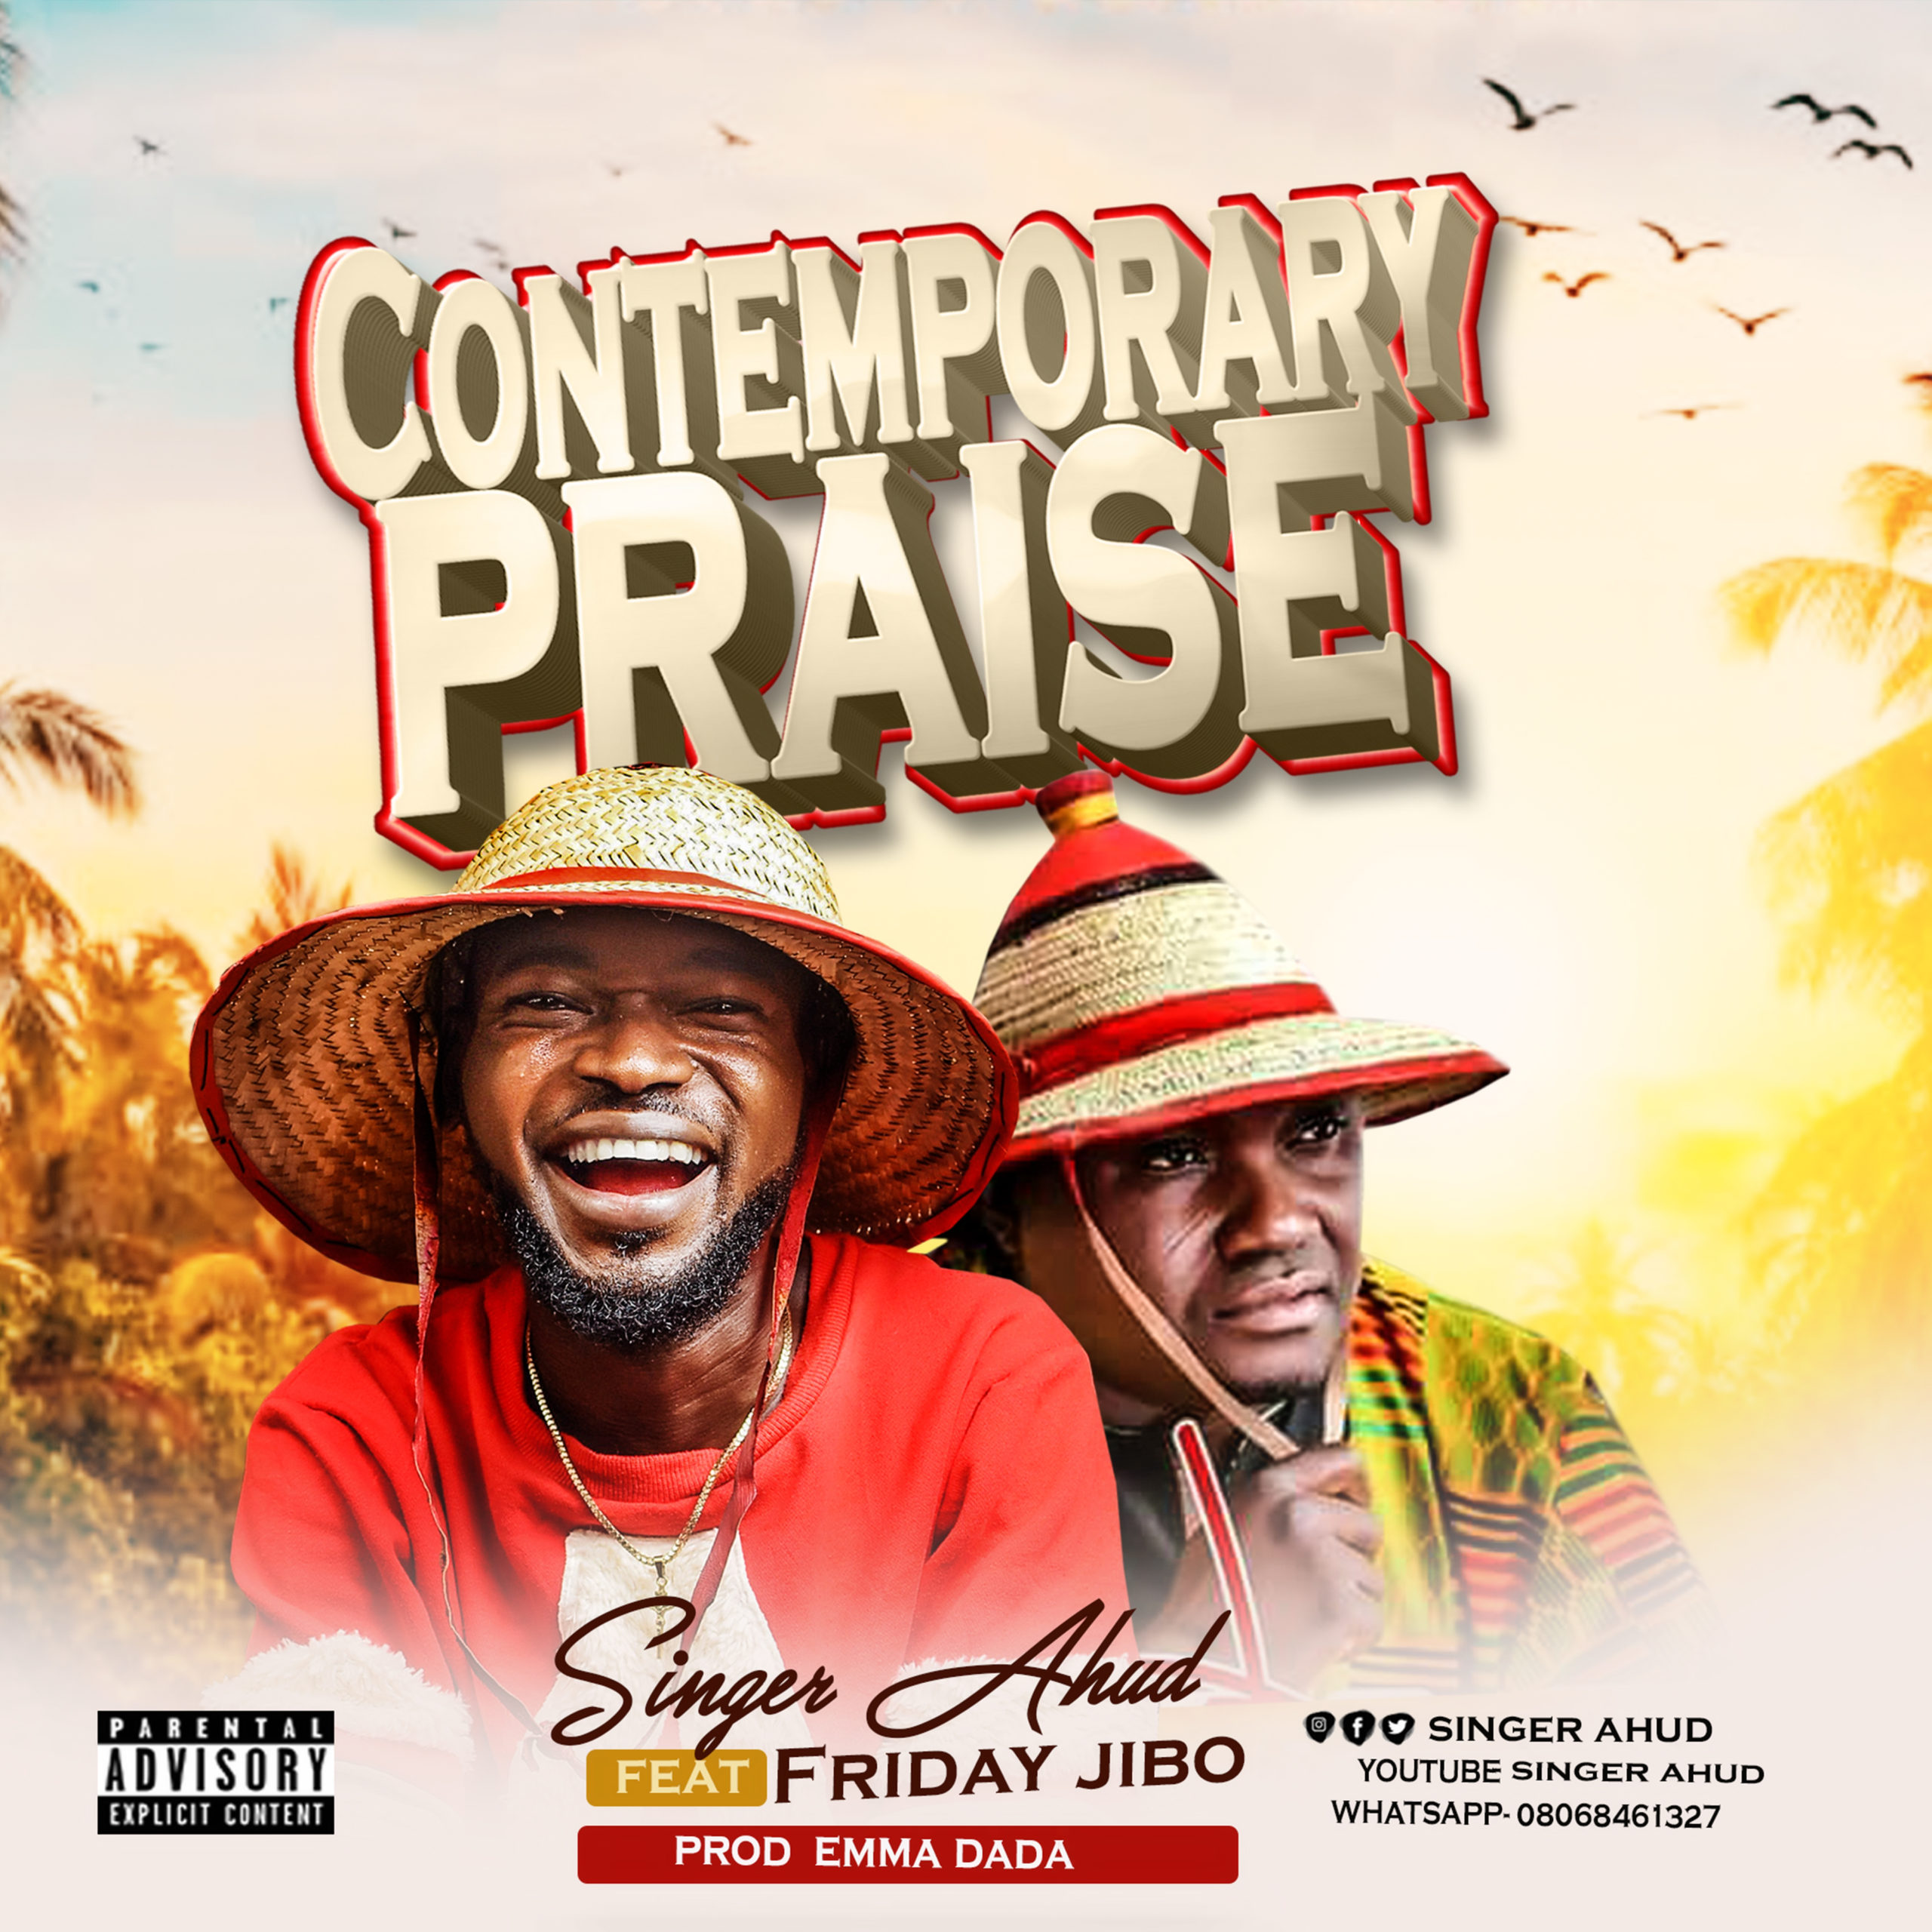 DOWNLOAD Mp3:Singer Ahud ft Friday Jibo - Contemporary Praise